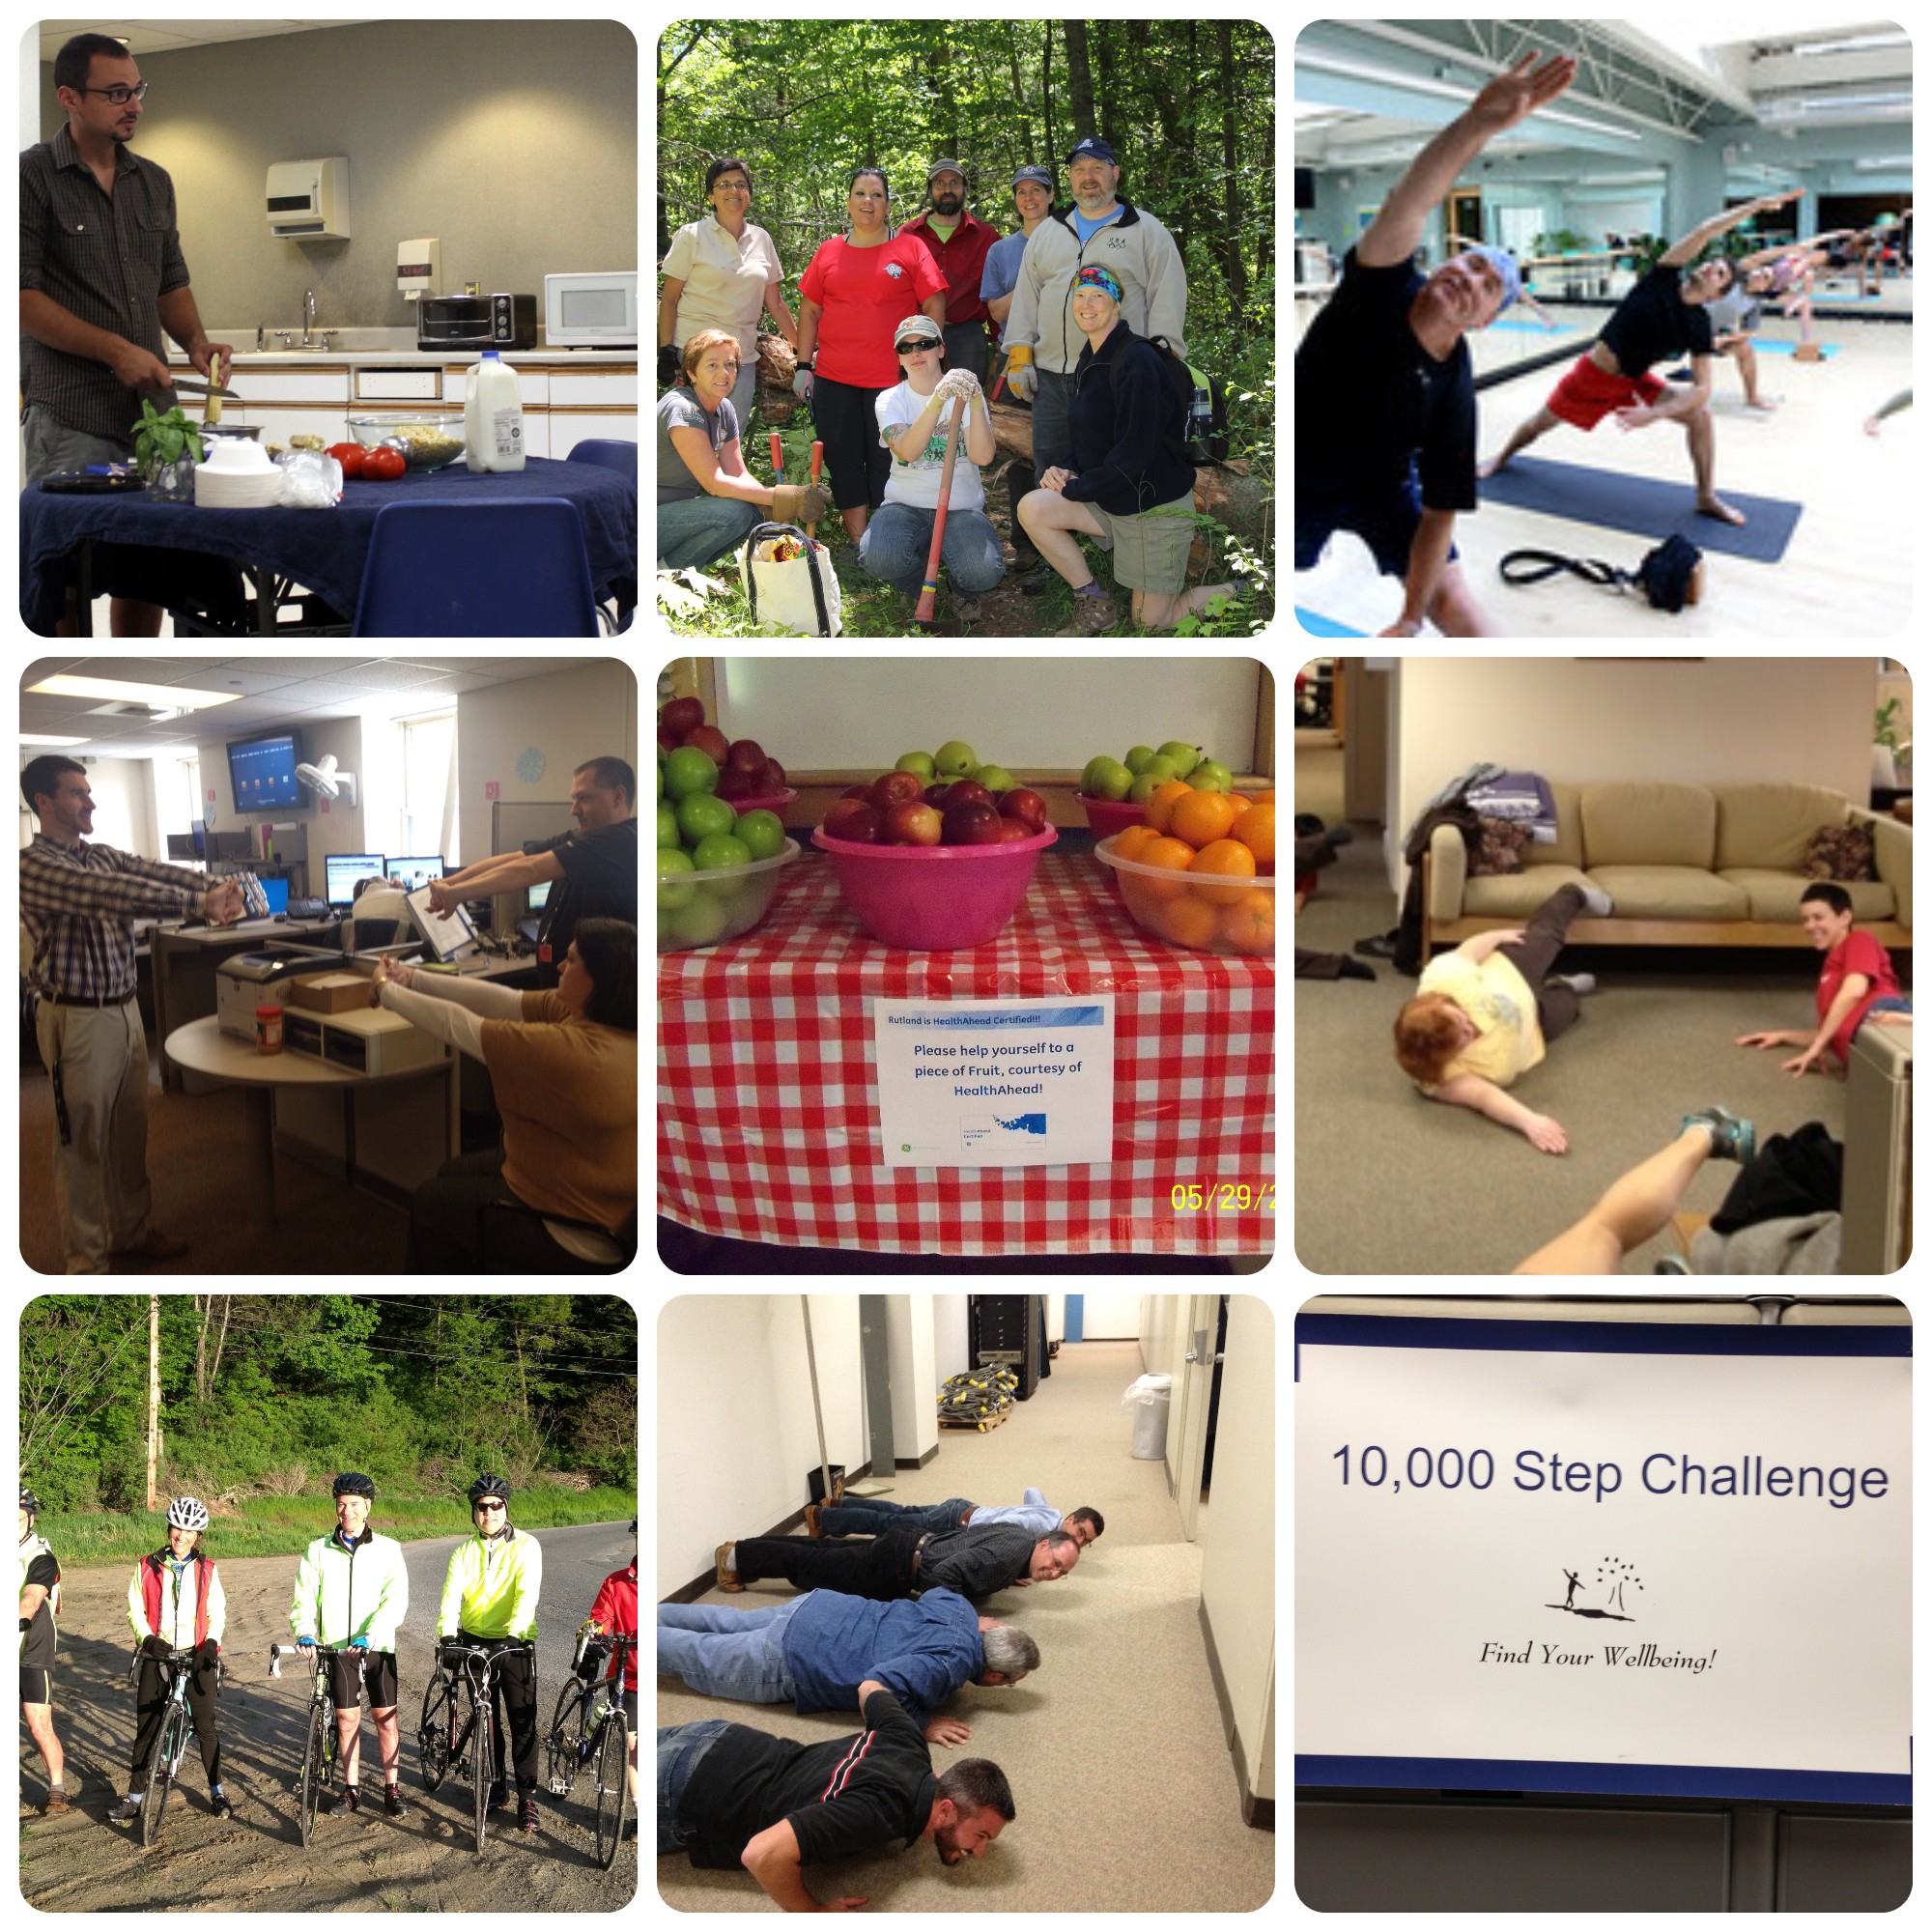 Collage of 9 photos showing worksite wellness activities